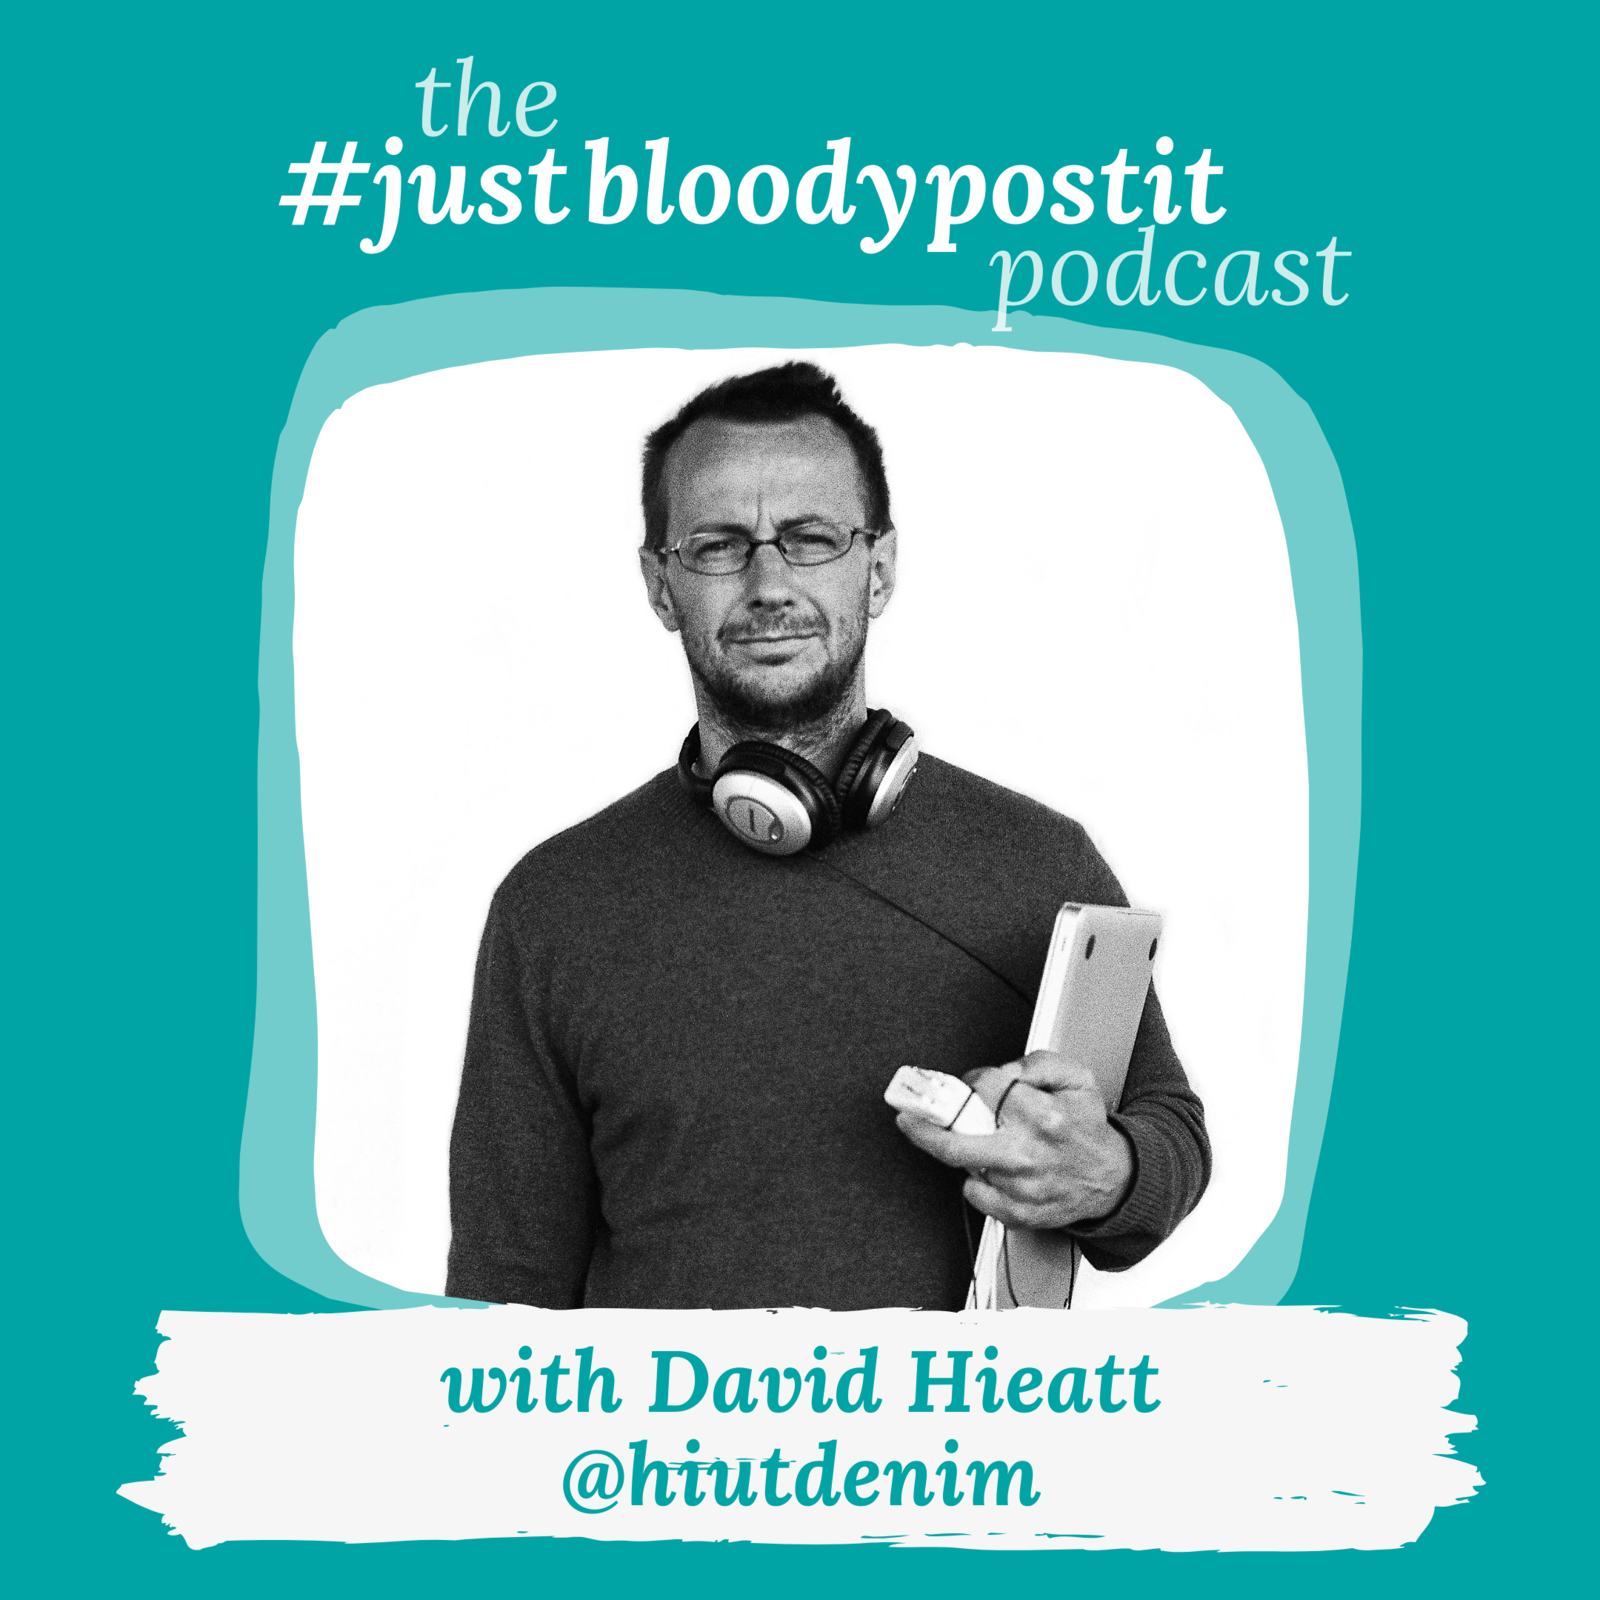 S3 Ep44: The mighty strength and influence of small businesses with David Hieatt co-founder of @hiutdenim